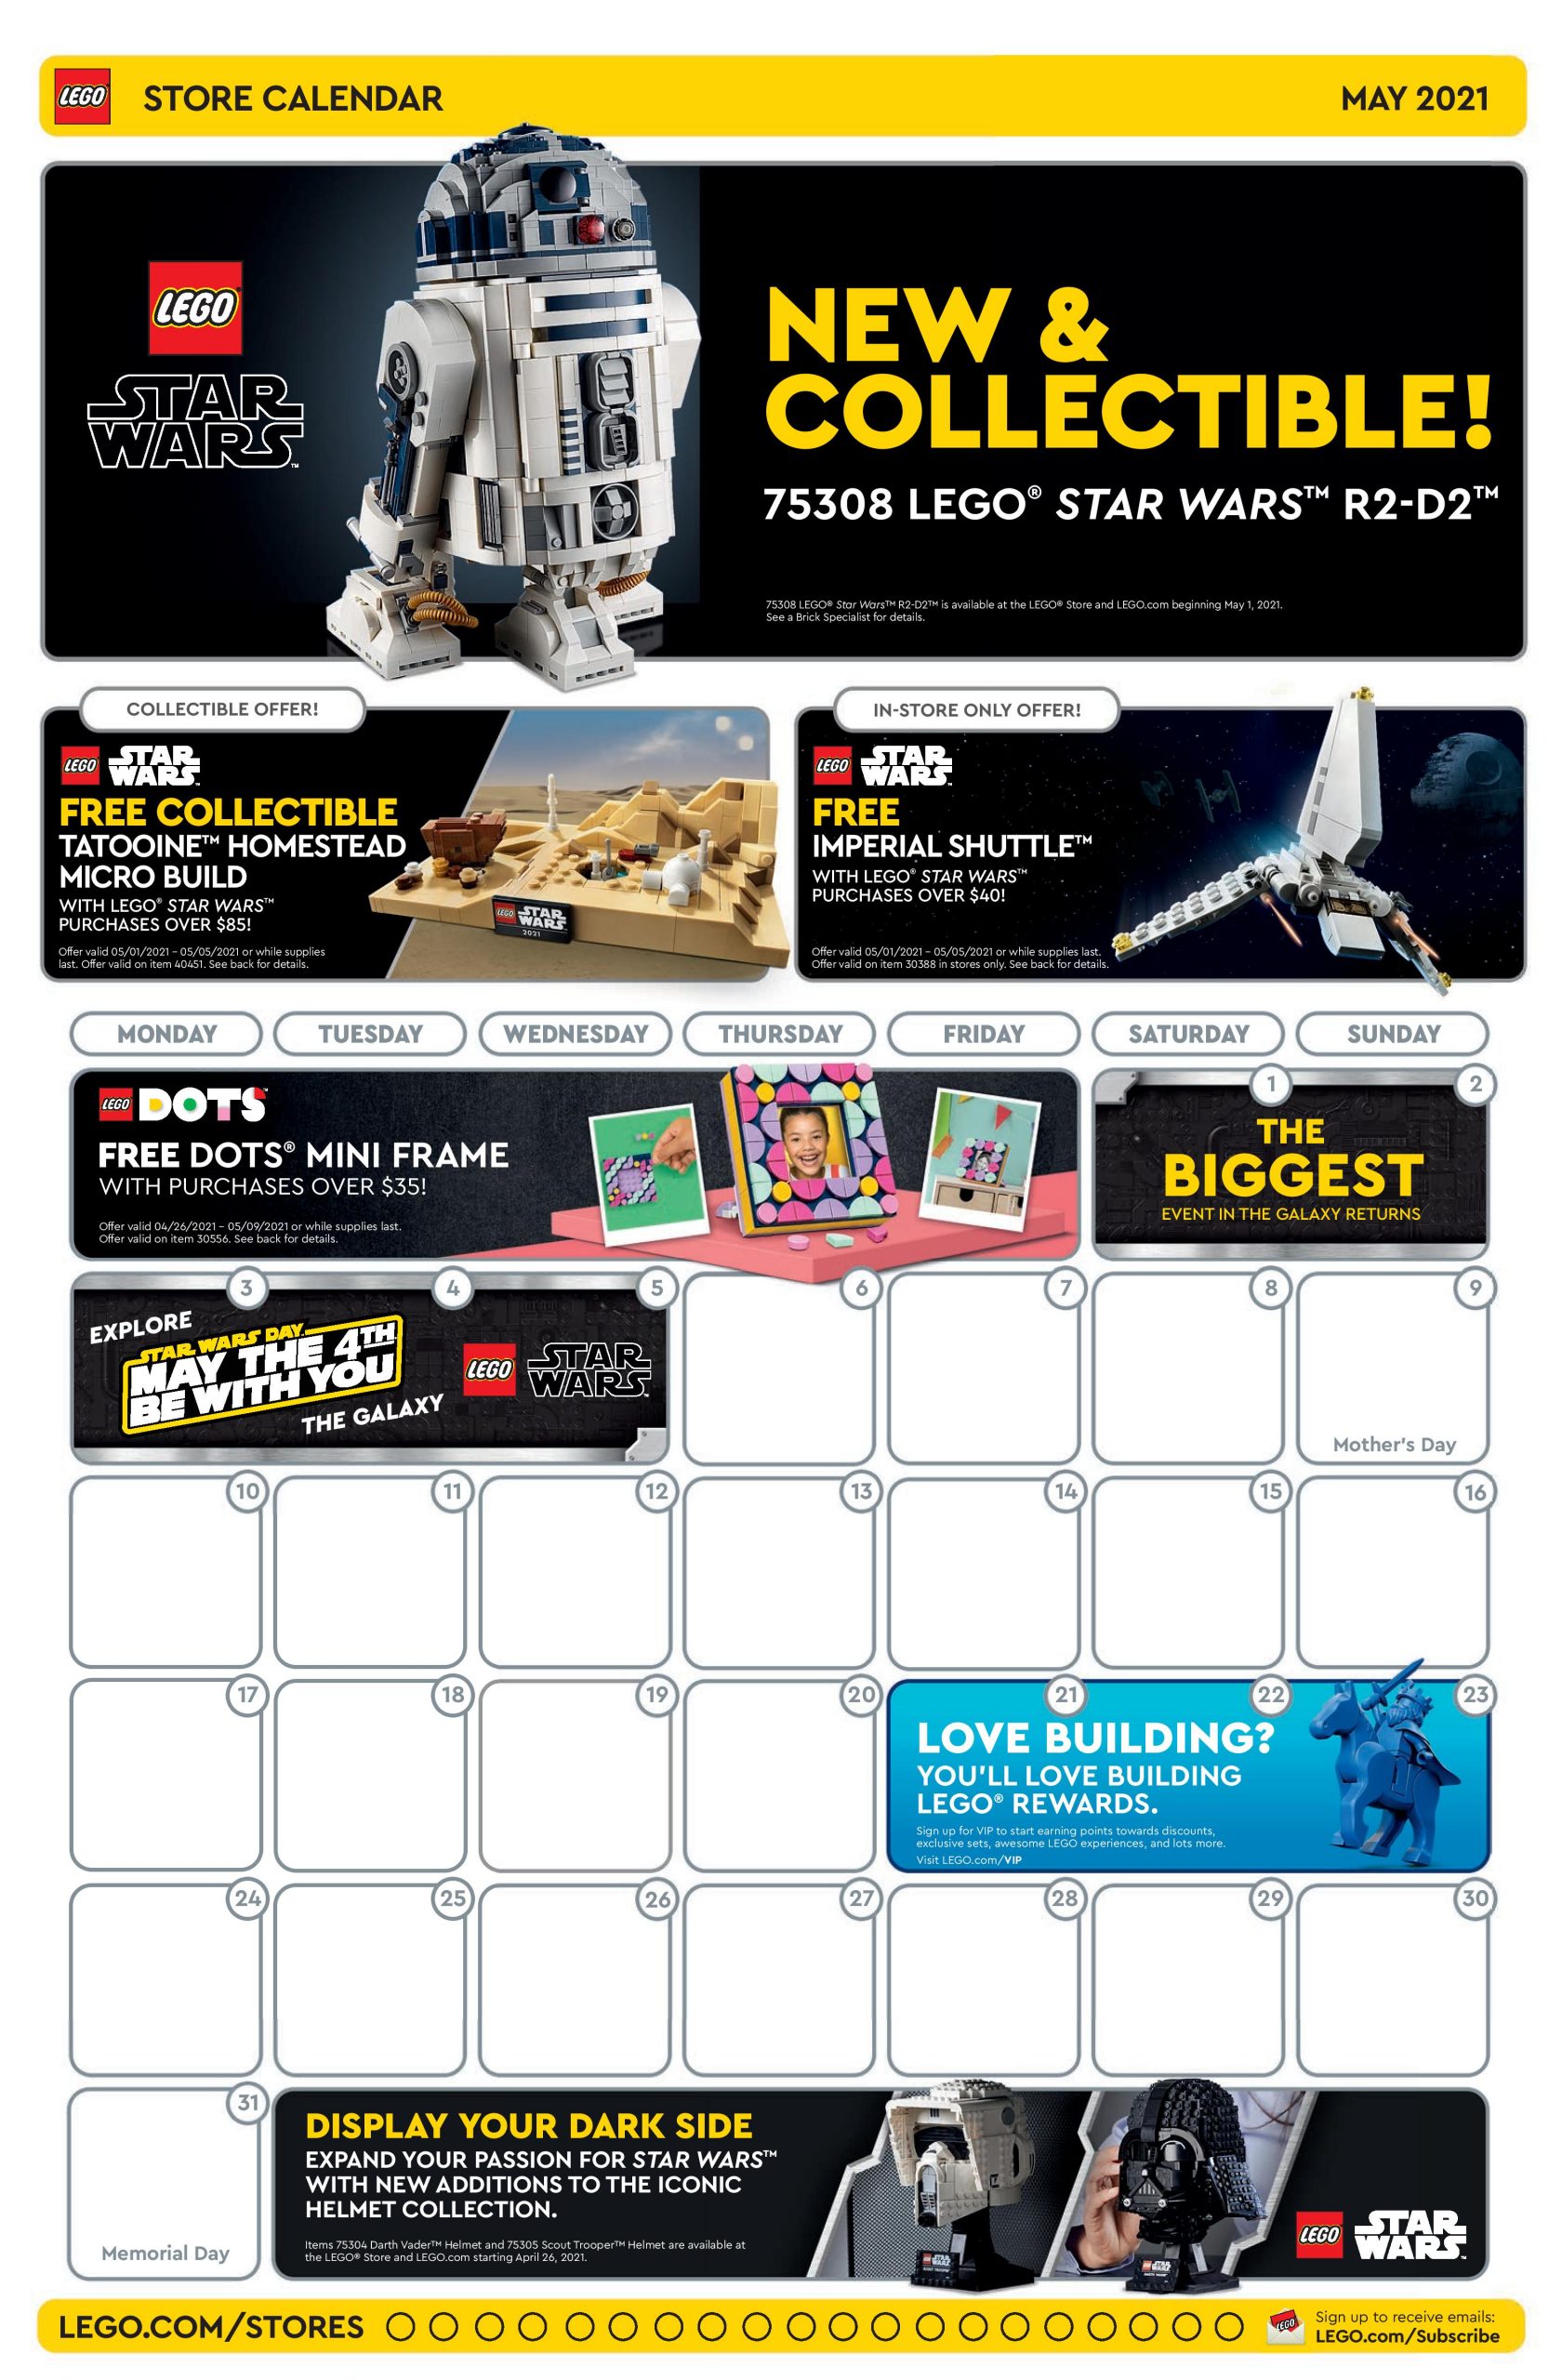 Lego Calendar May 2022 Lego May 2021 Store Calendar Promotions & Events - The Brick Fan